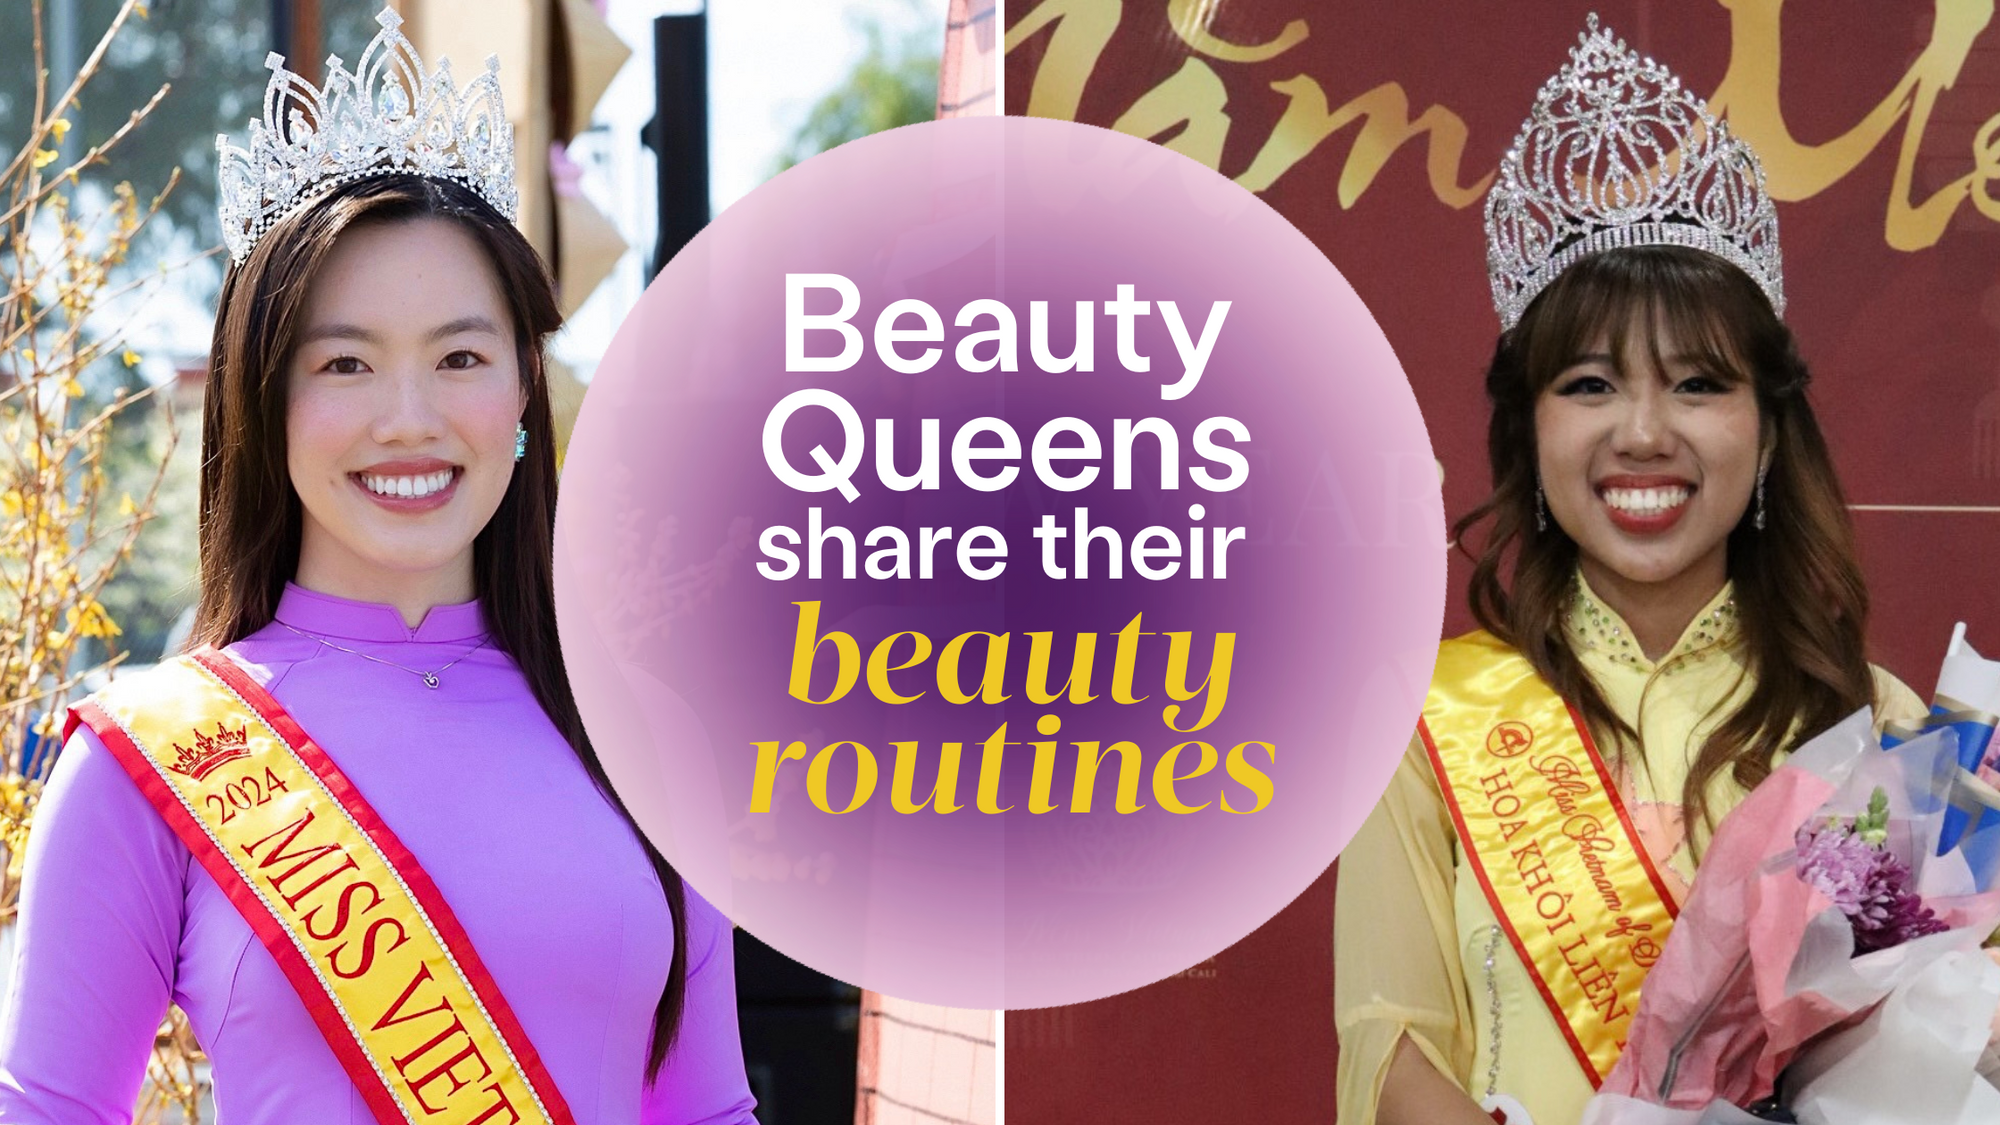 The Beauty Queen Routine: How these beauty queens stay beautiful, inside and out